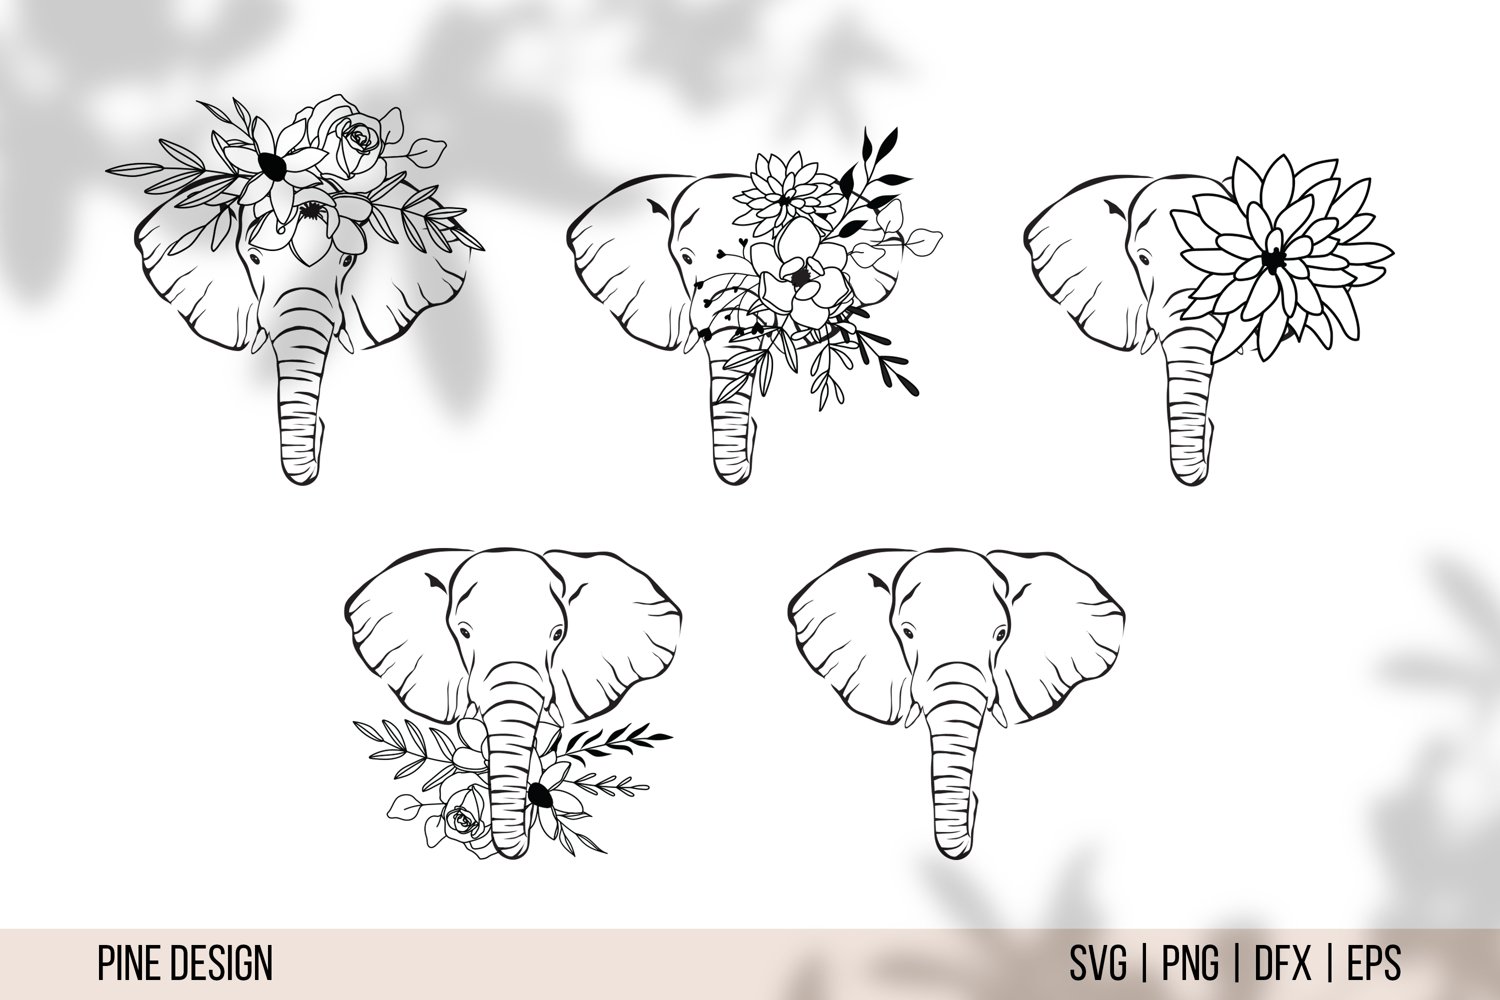 Bunch of elephants with flowers on their heads.